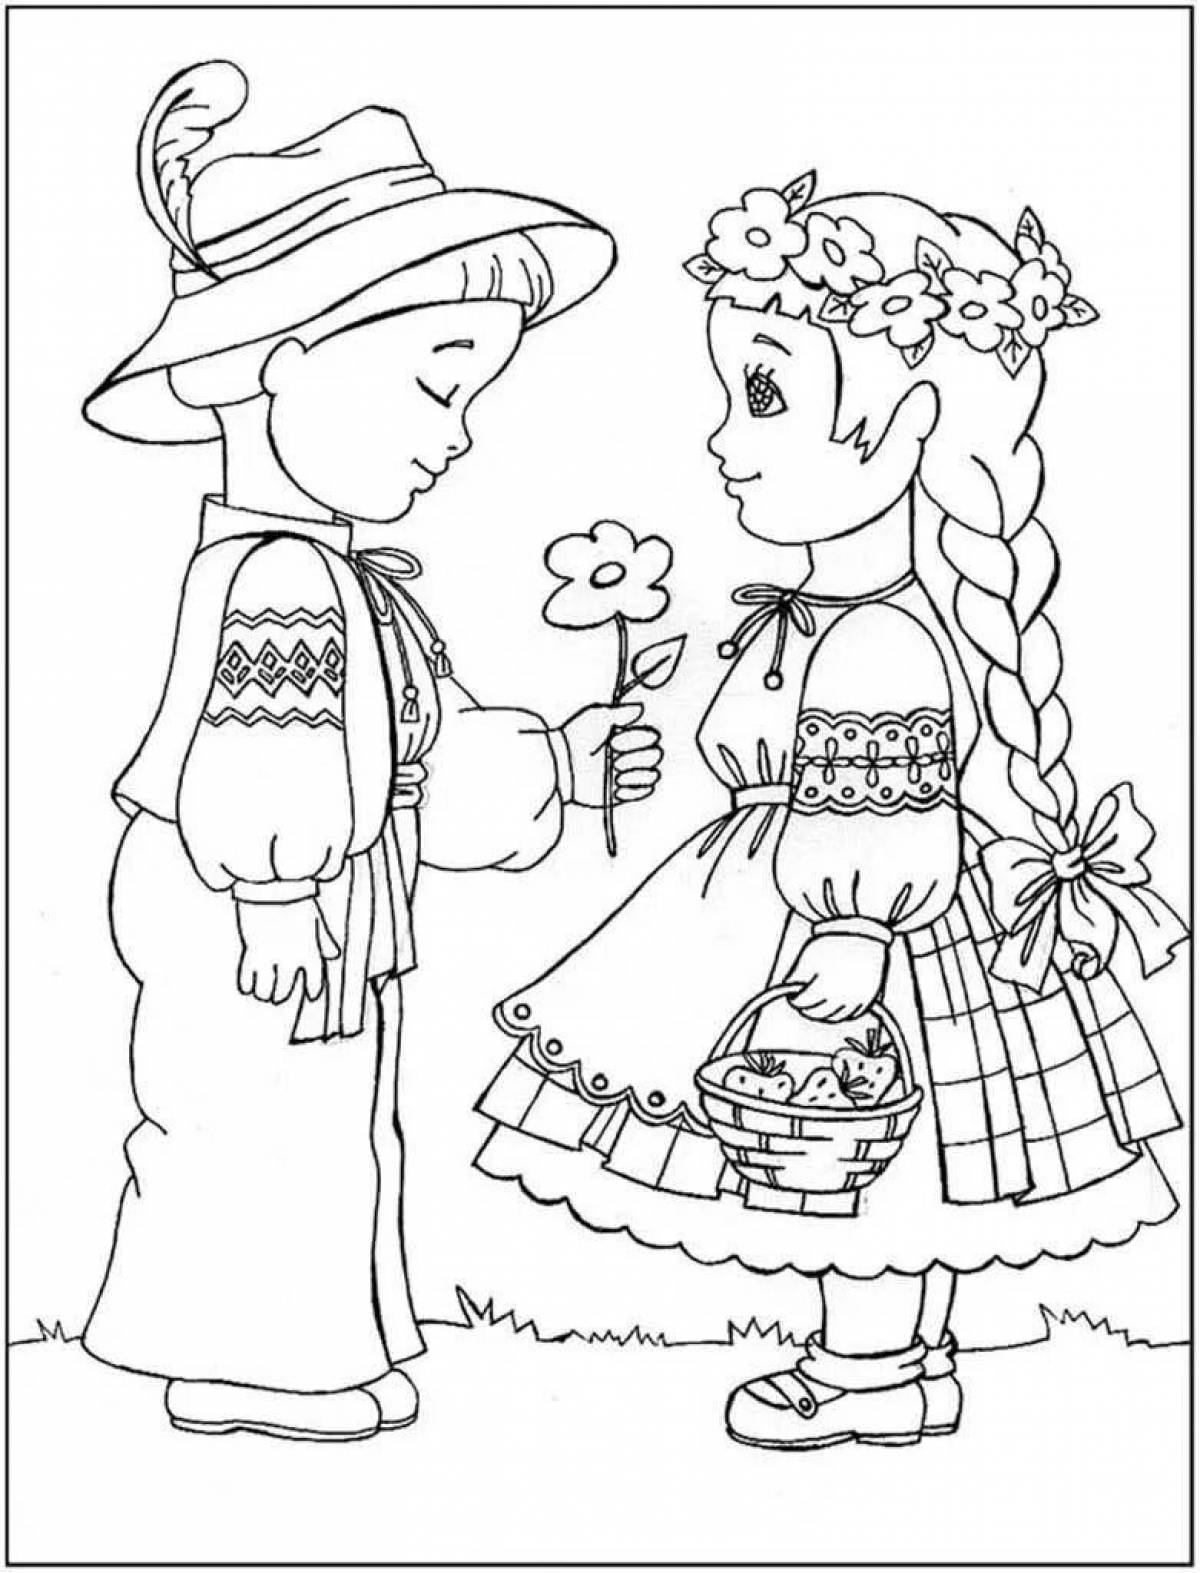 Coloring page dazzling Belarusian national costume